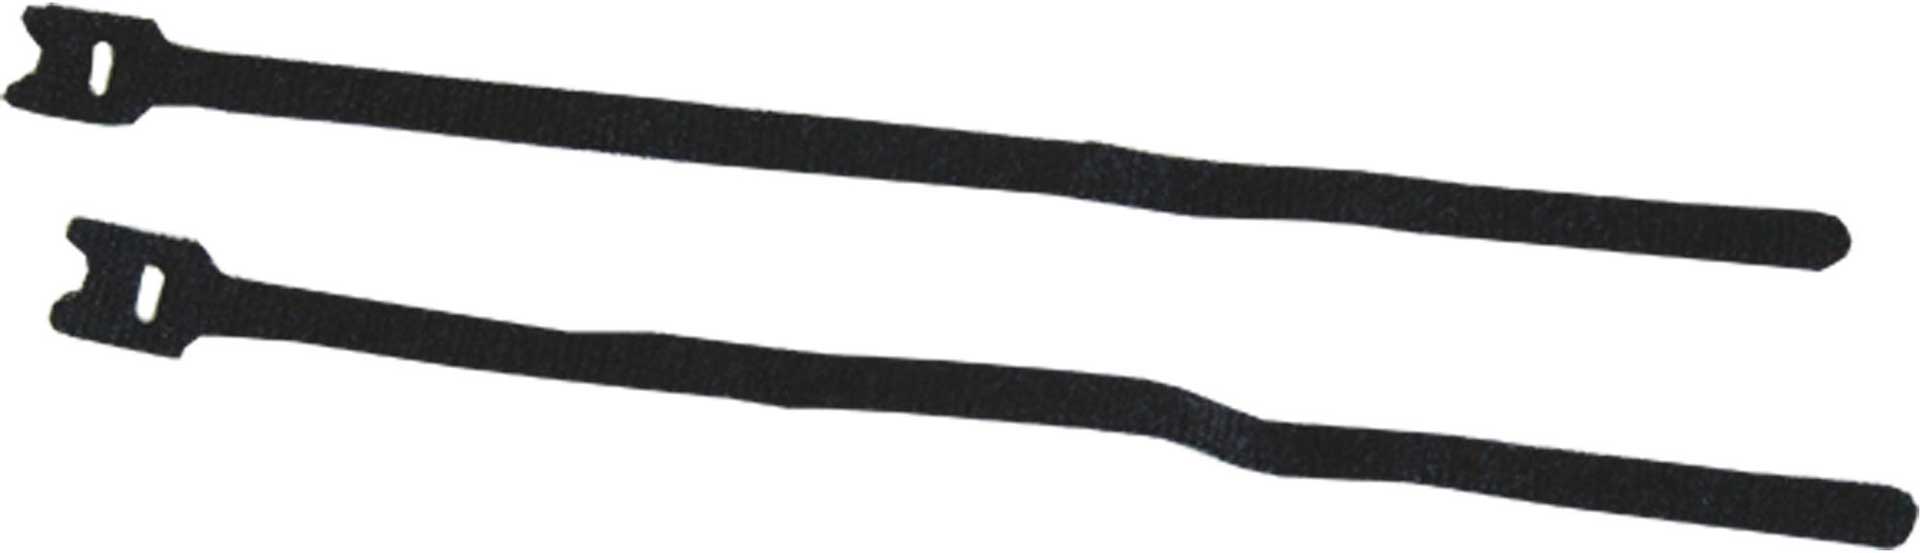 MODELLBAU LINDINGER CABLE TIE CLIMBING 7X200MM 10PC.